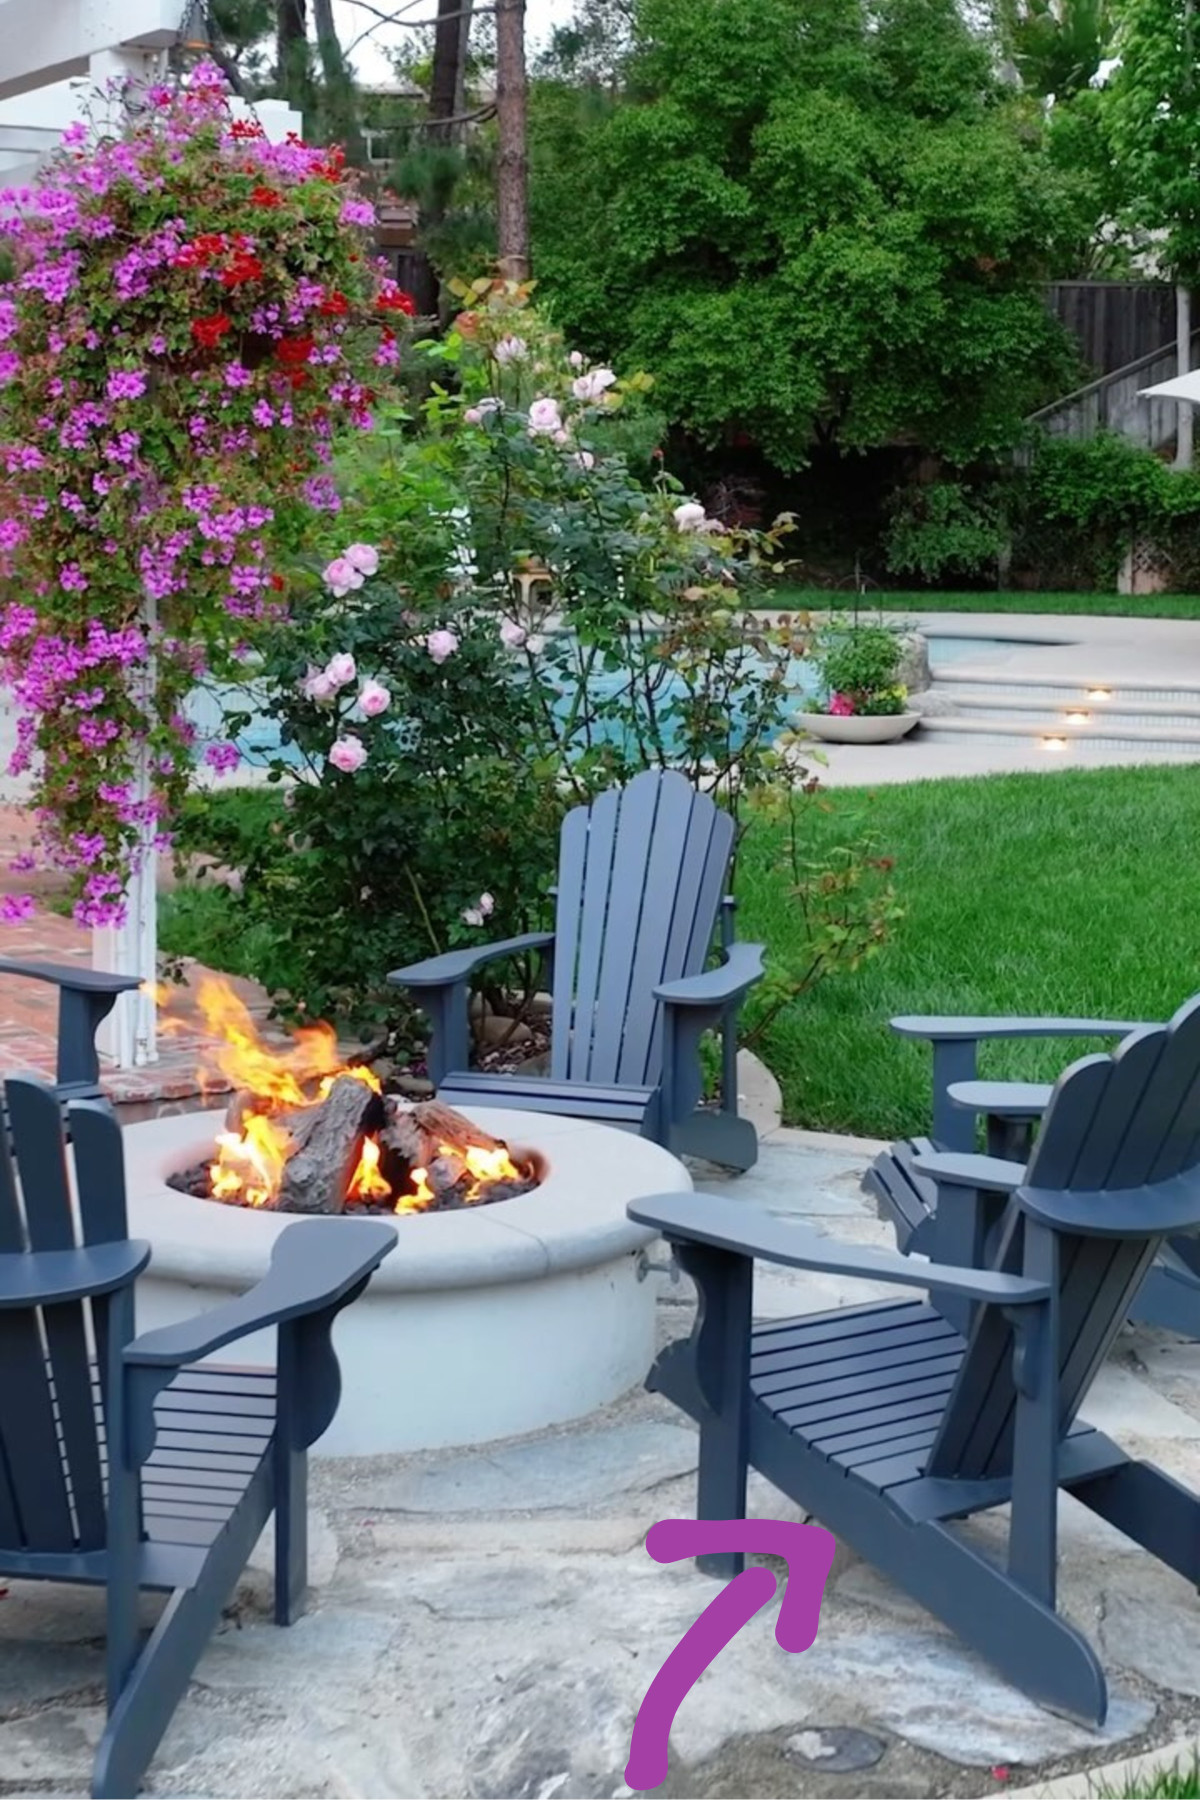 Backyard fire pit area with inground pool landscaped yard and flowers with concrete patio